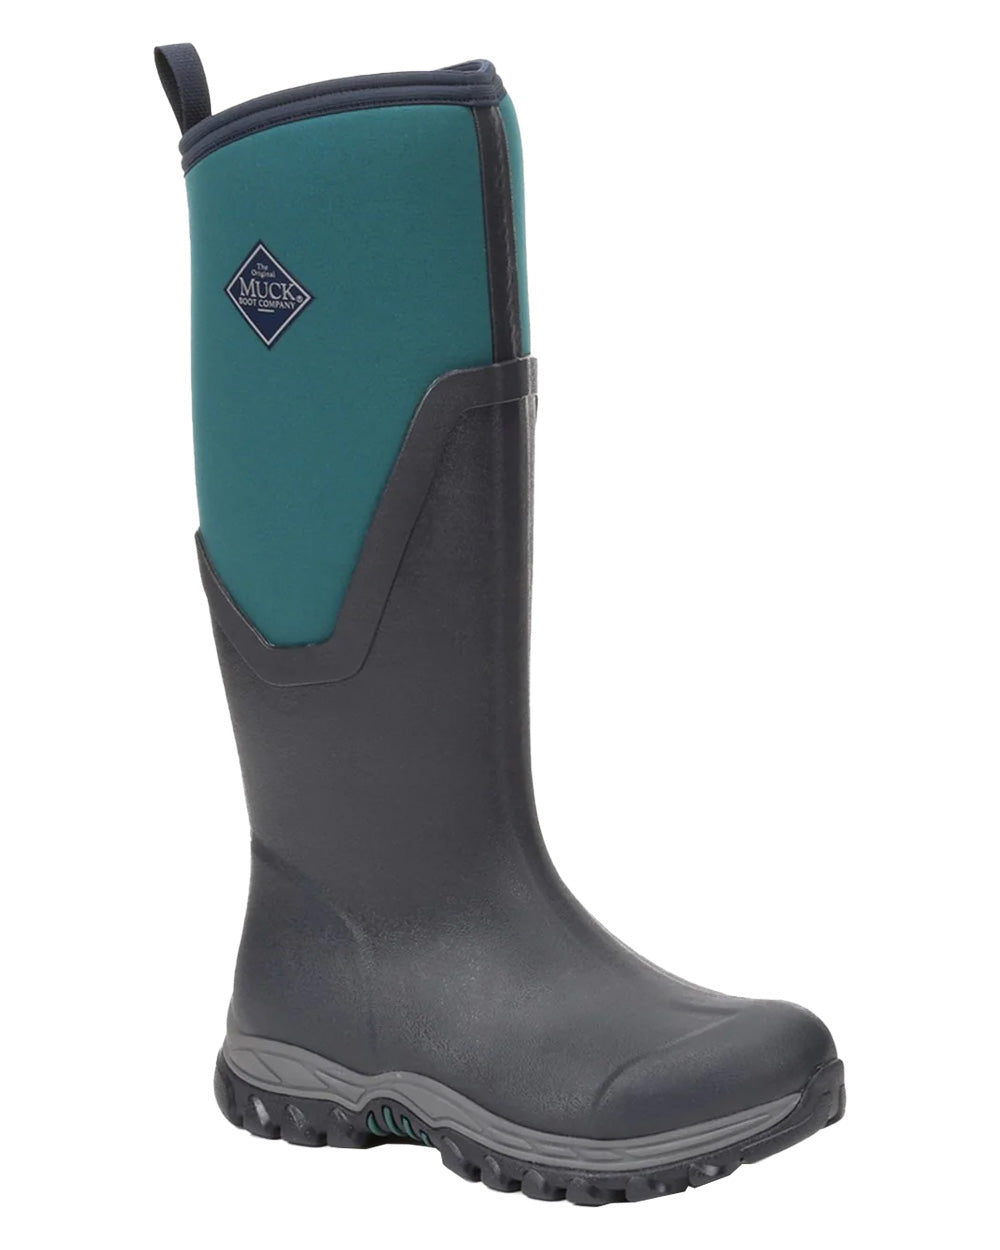 Navy/Spruce coloured Muck Boots Womens Artic Sport II Tall Wellingtons on White background 